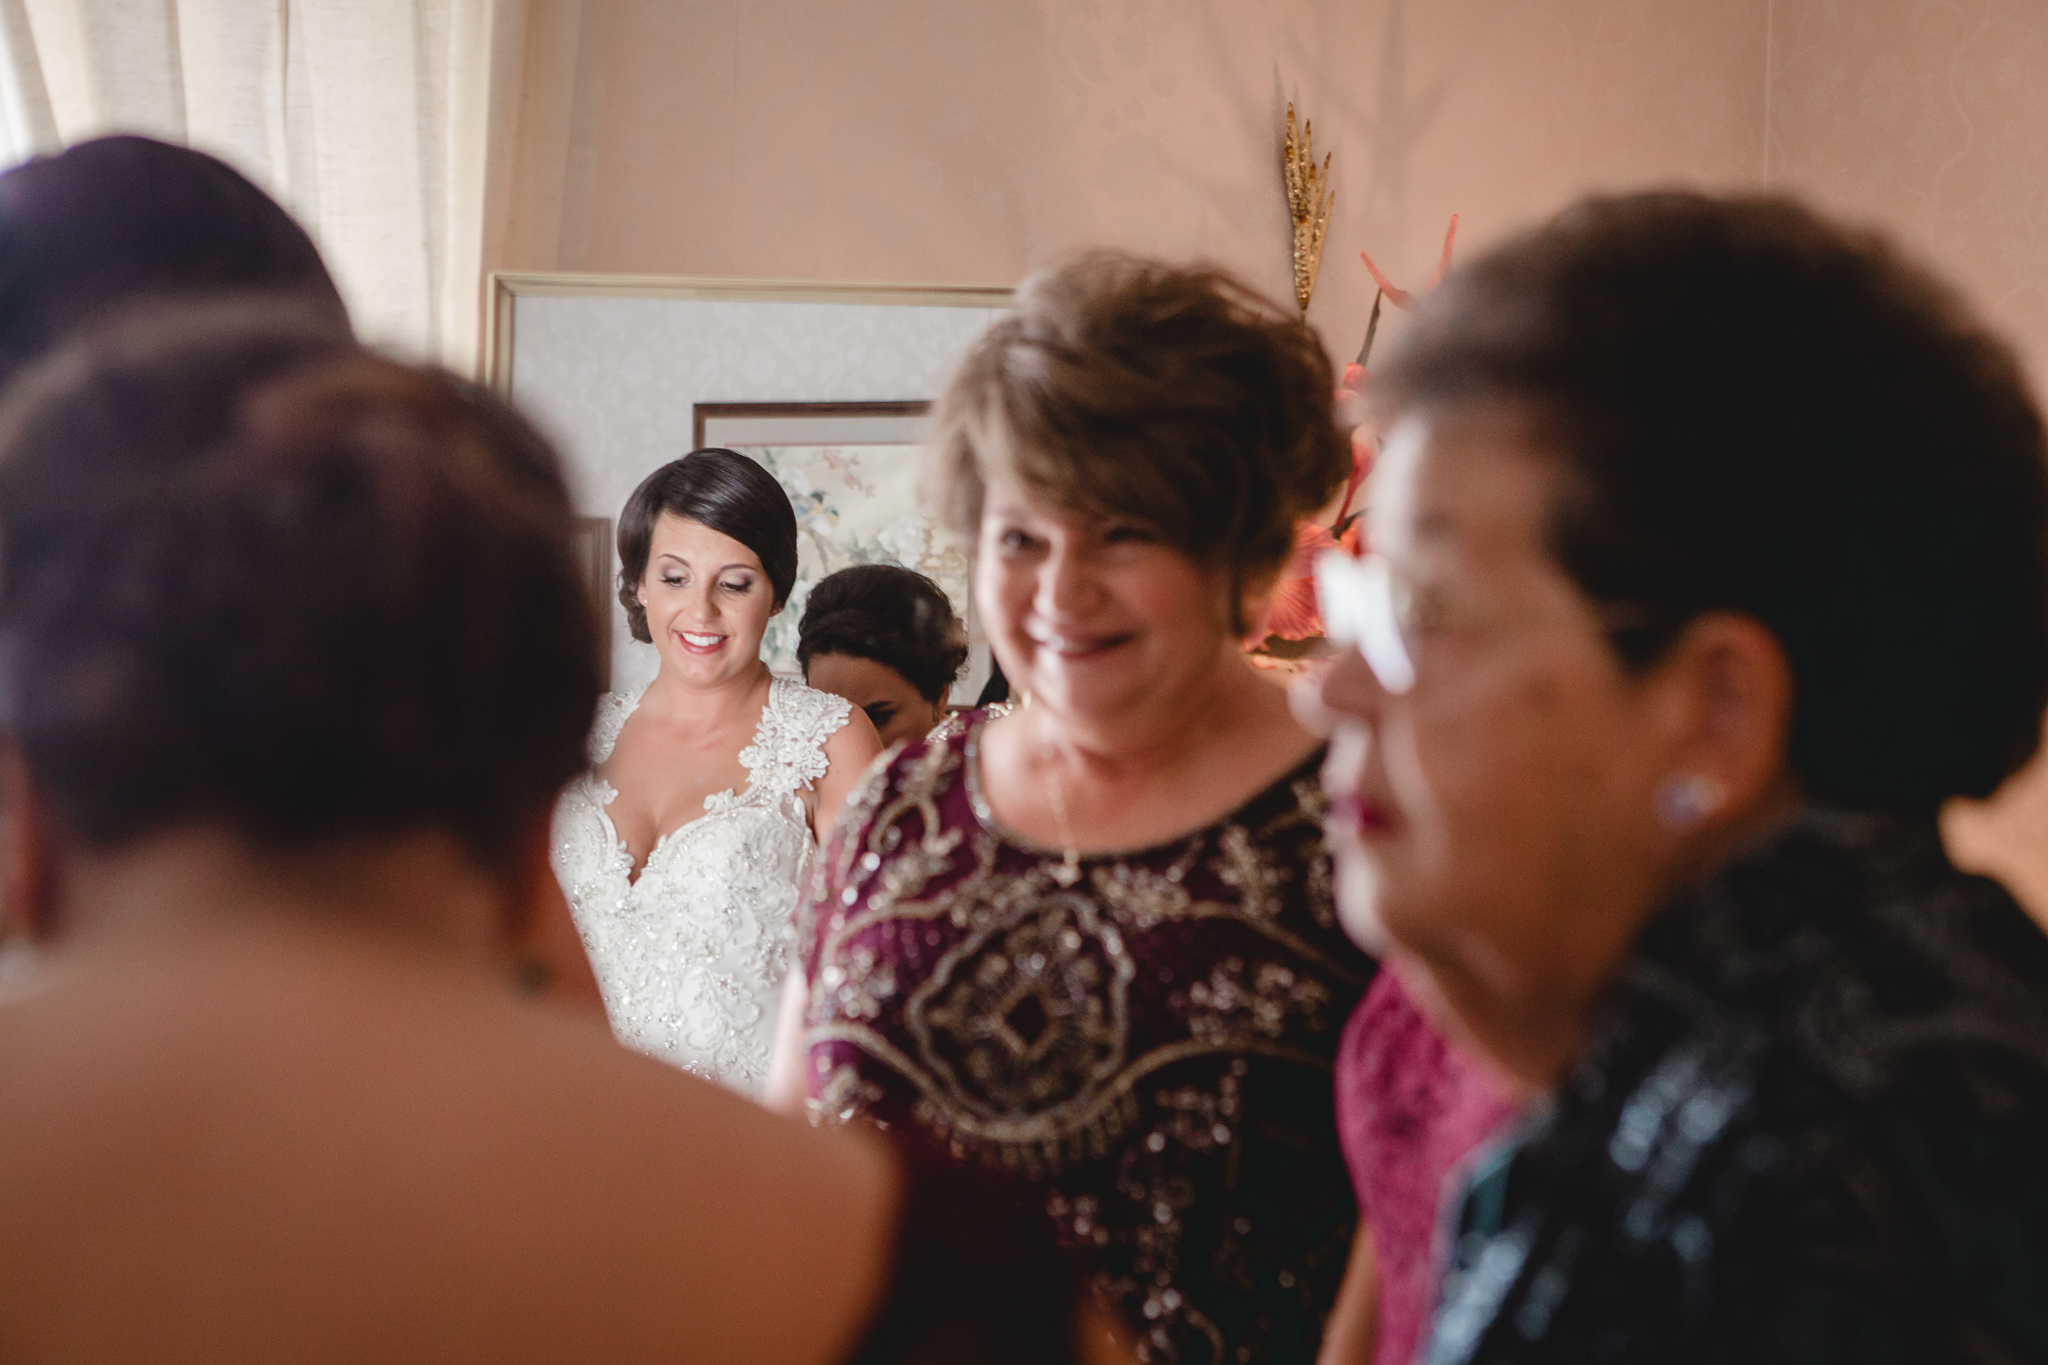 Mother of the bride looks at her daughter while she dresses for her wedding